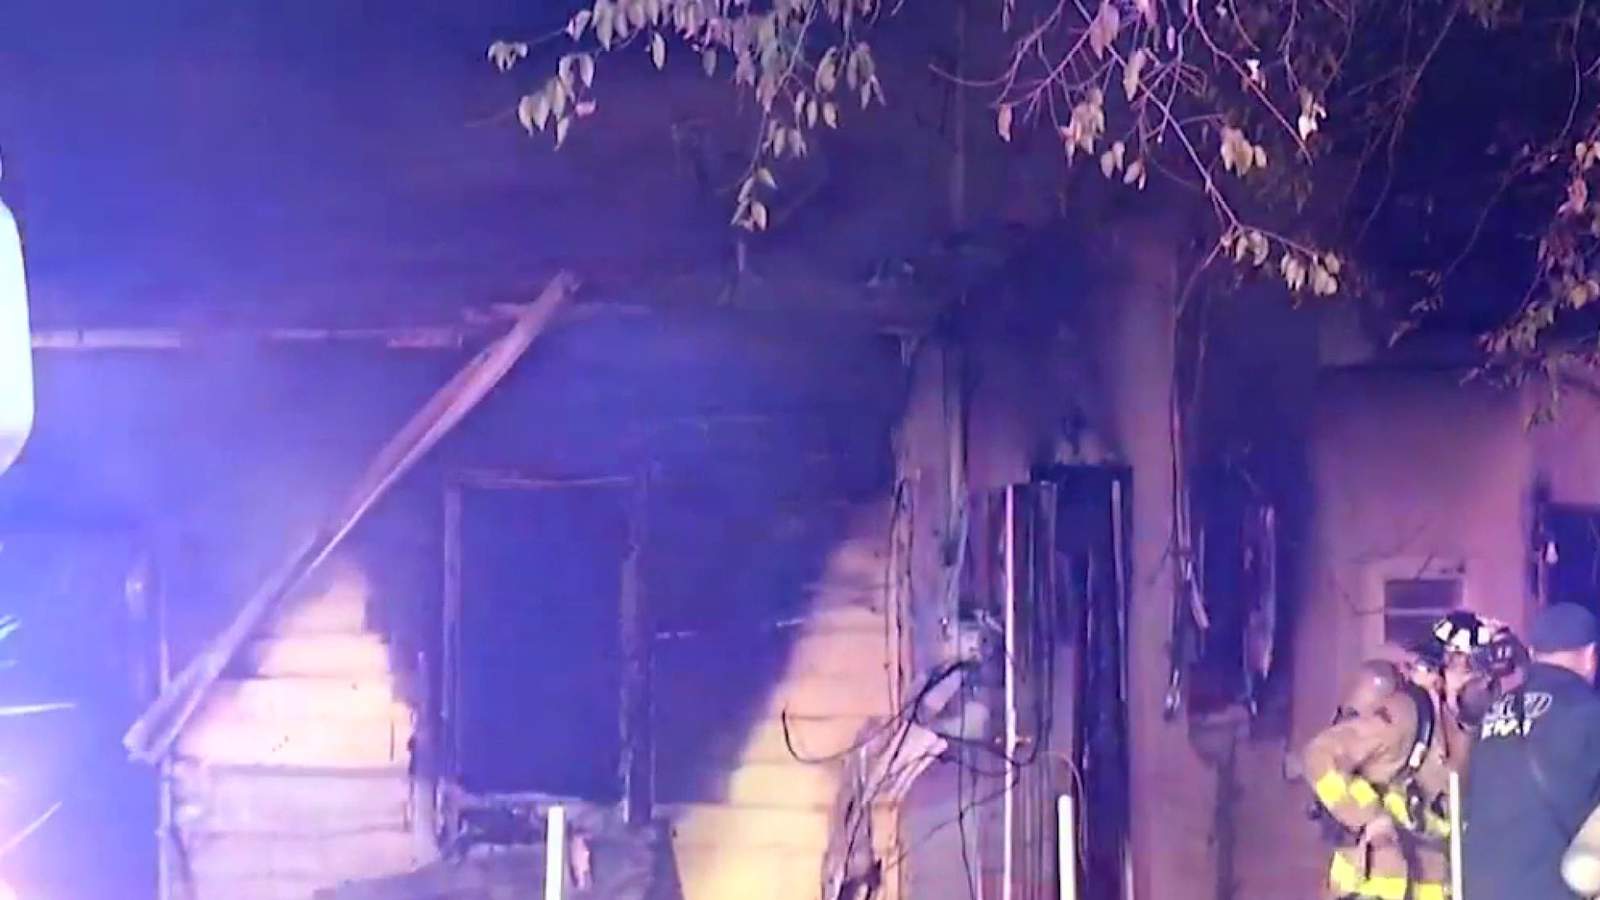 Man loses his Southwest Side home to overnight fire